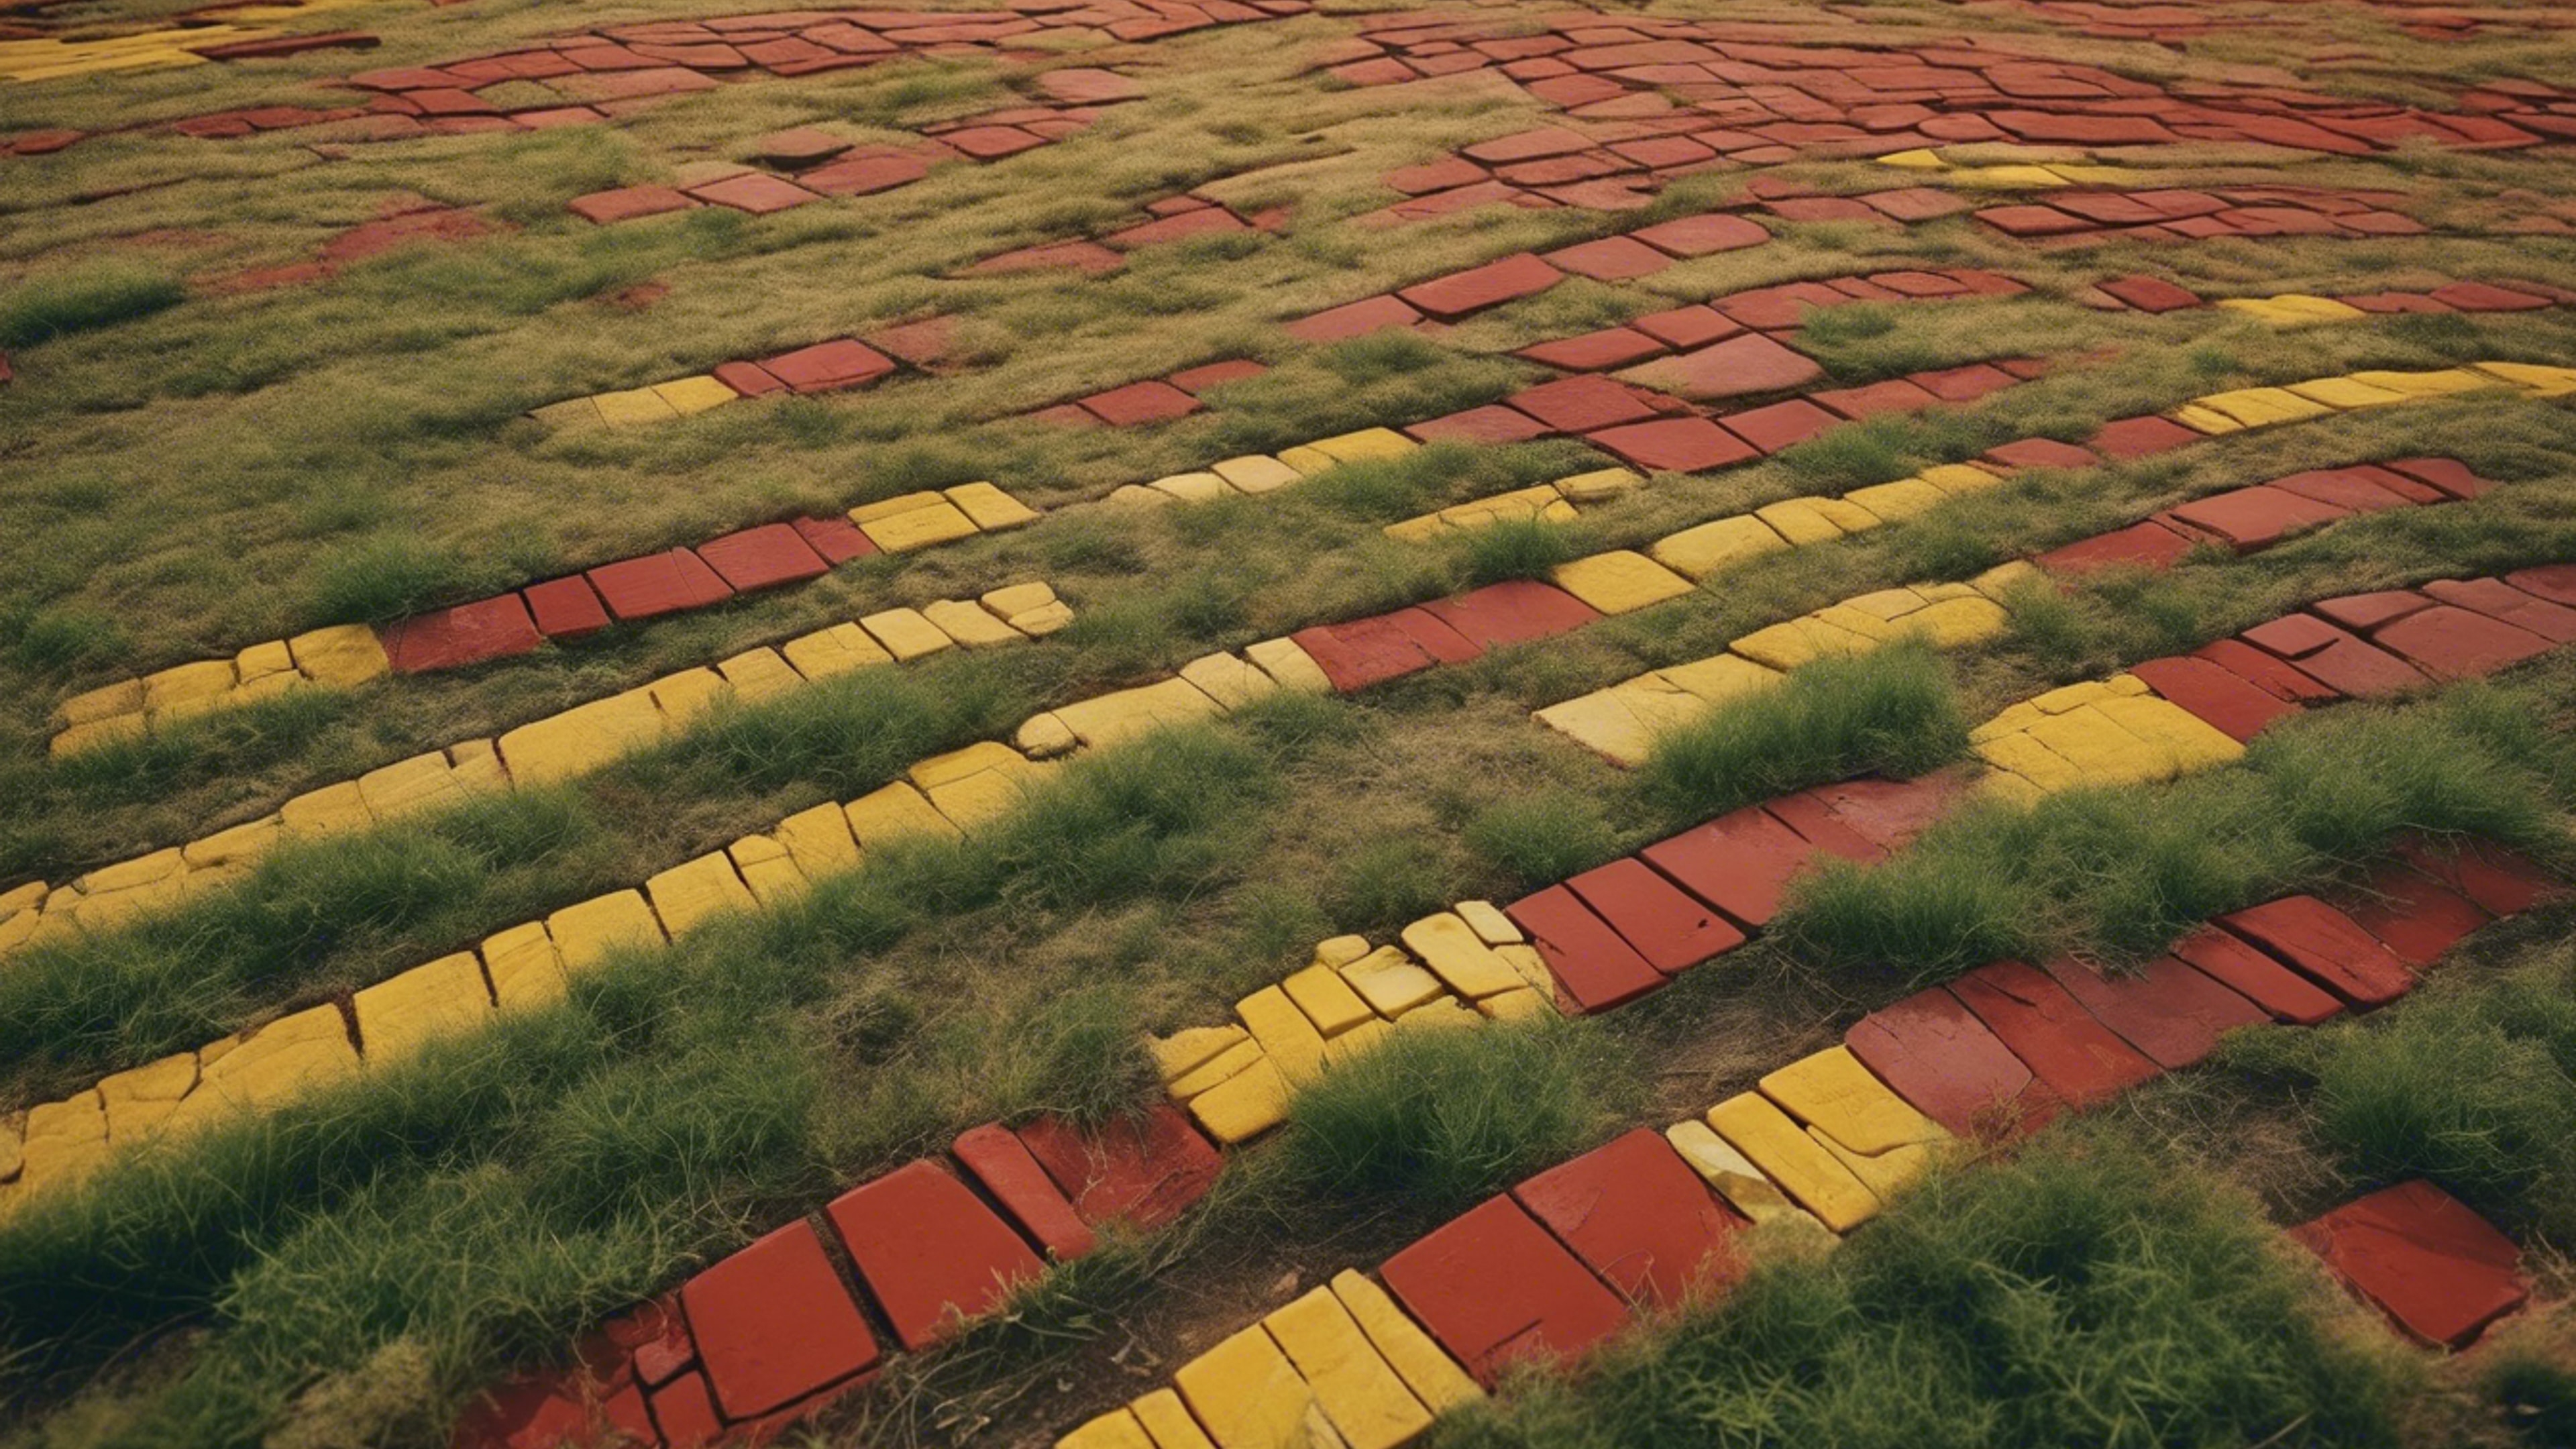 A bird's eye view of a red and yellow brick road weaving through a meadow. Wallpaper[b665fbc055ed4704af98]